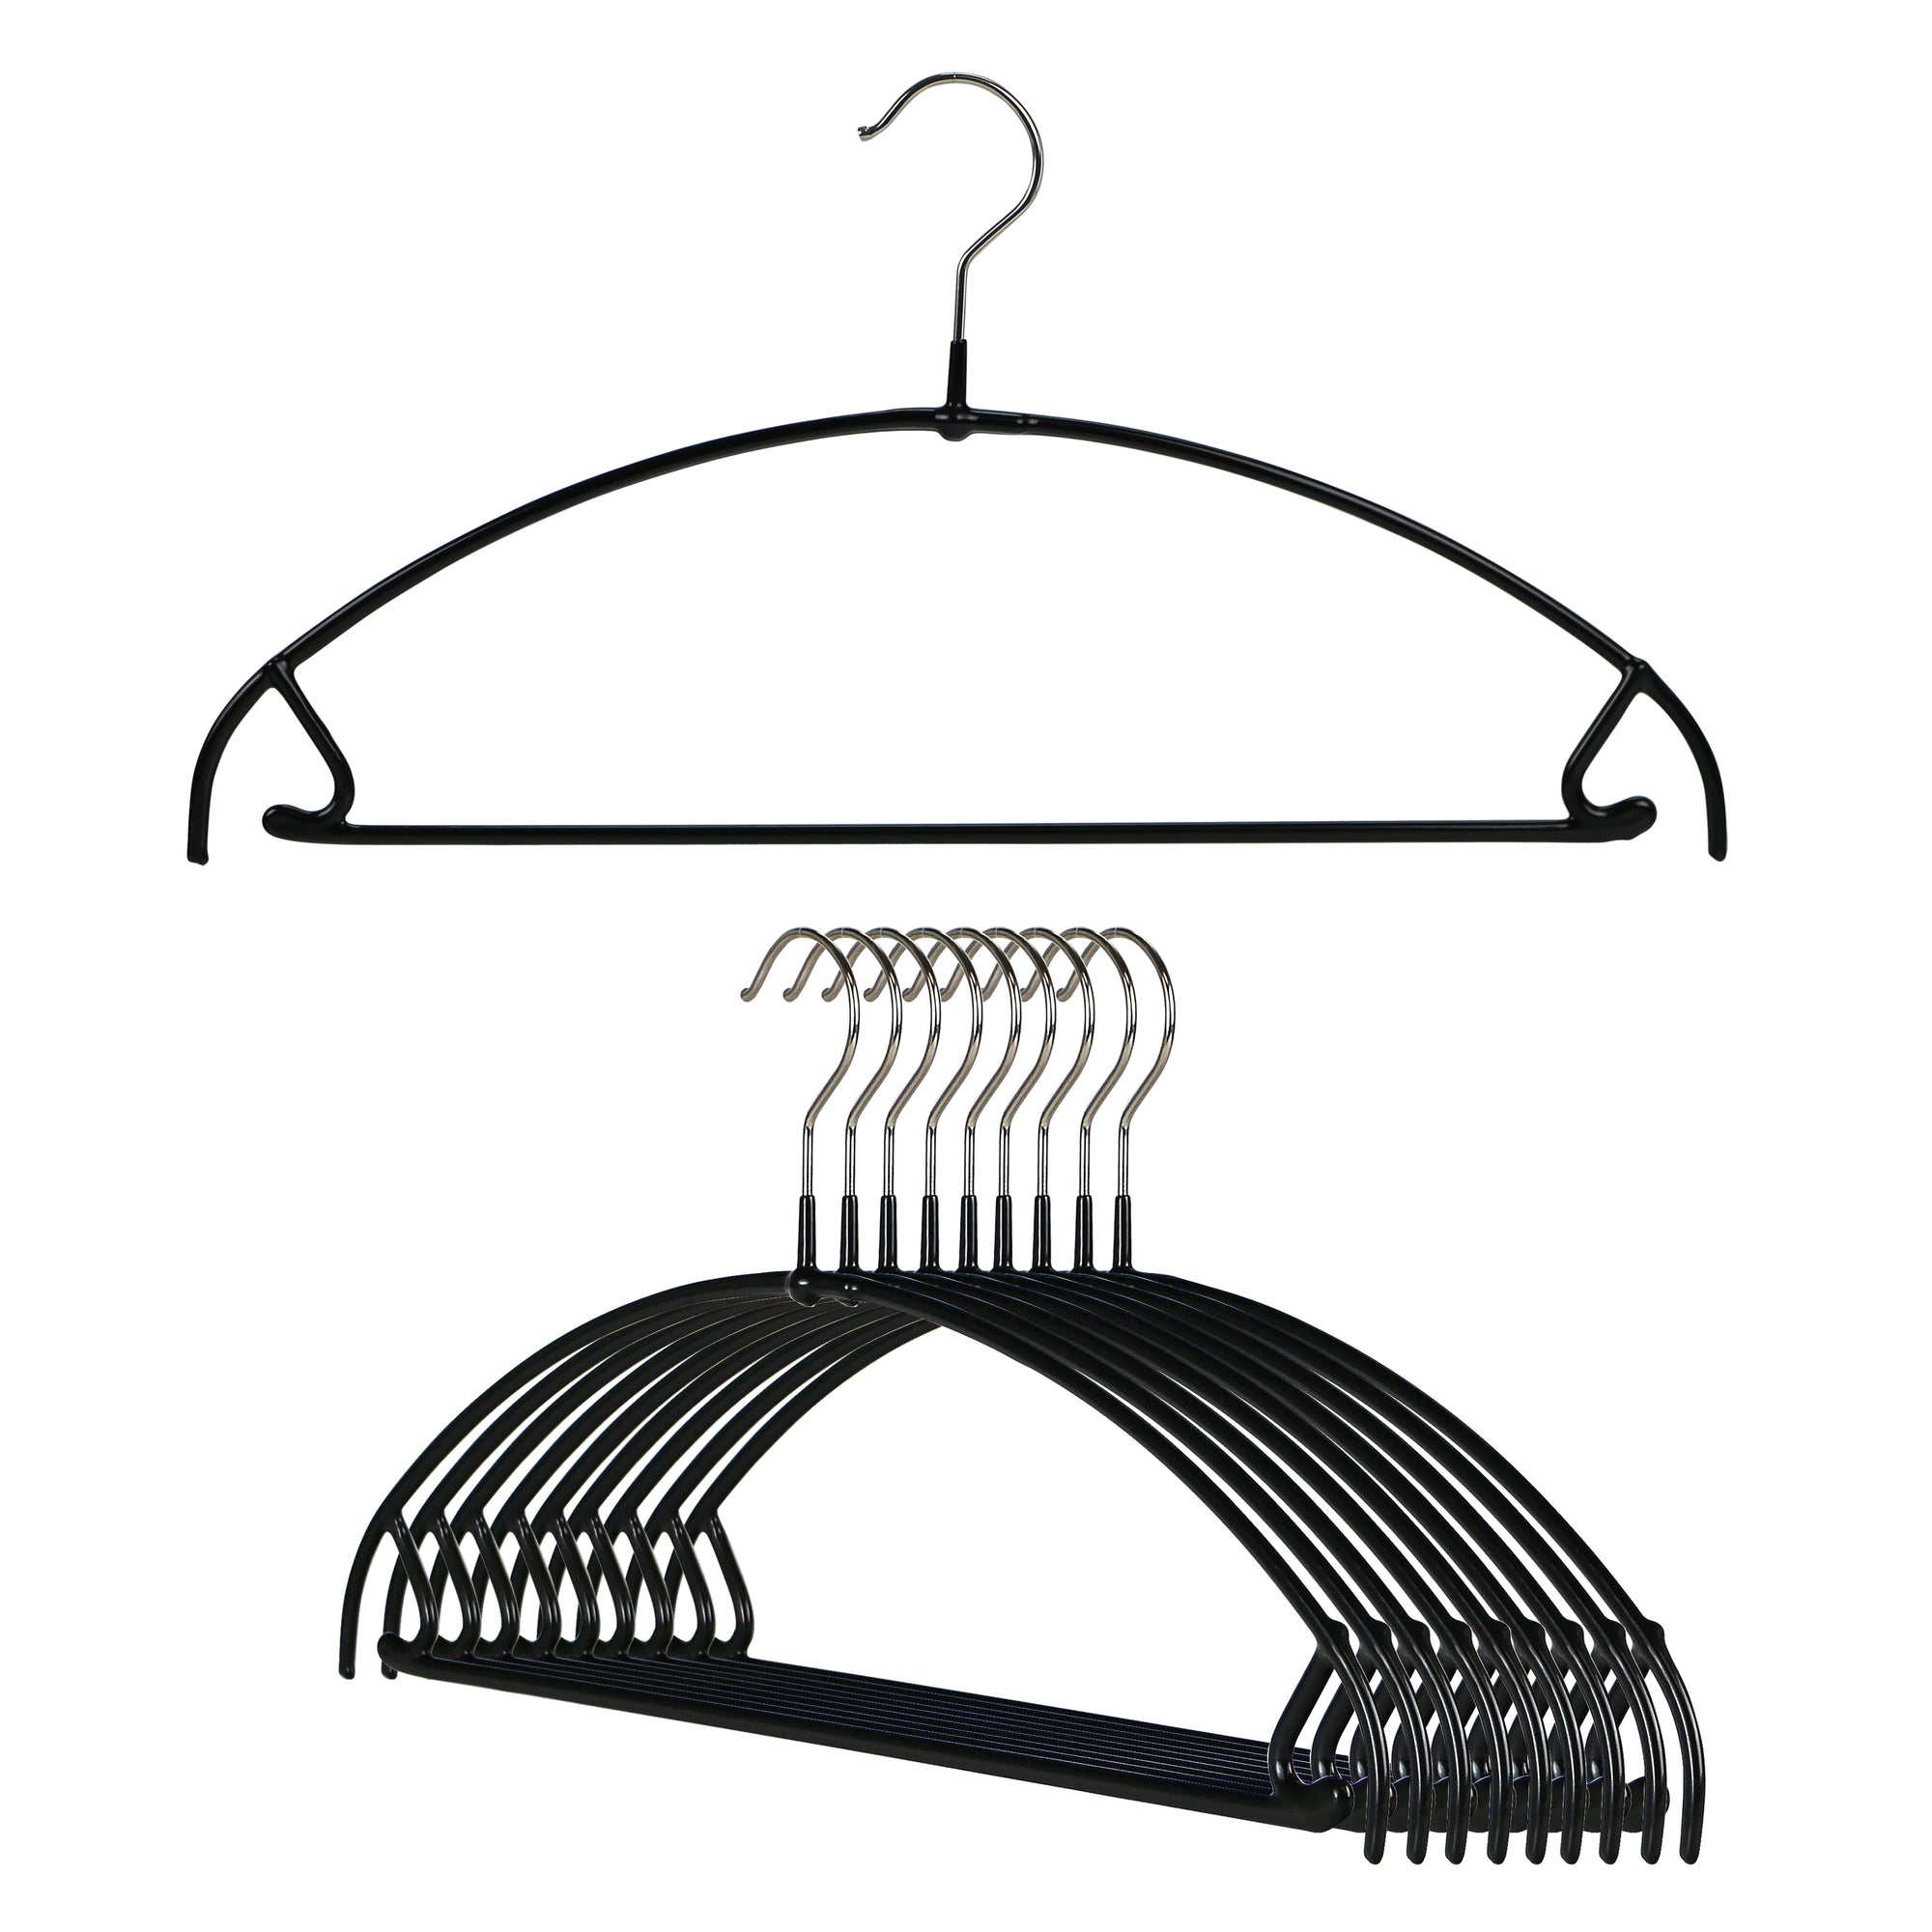 MAWA Non-Slip Space-Saving Clothes Hanger with Bar and Hooks for